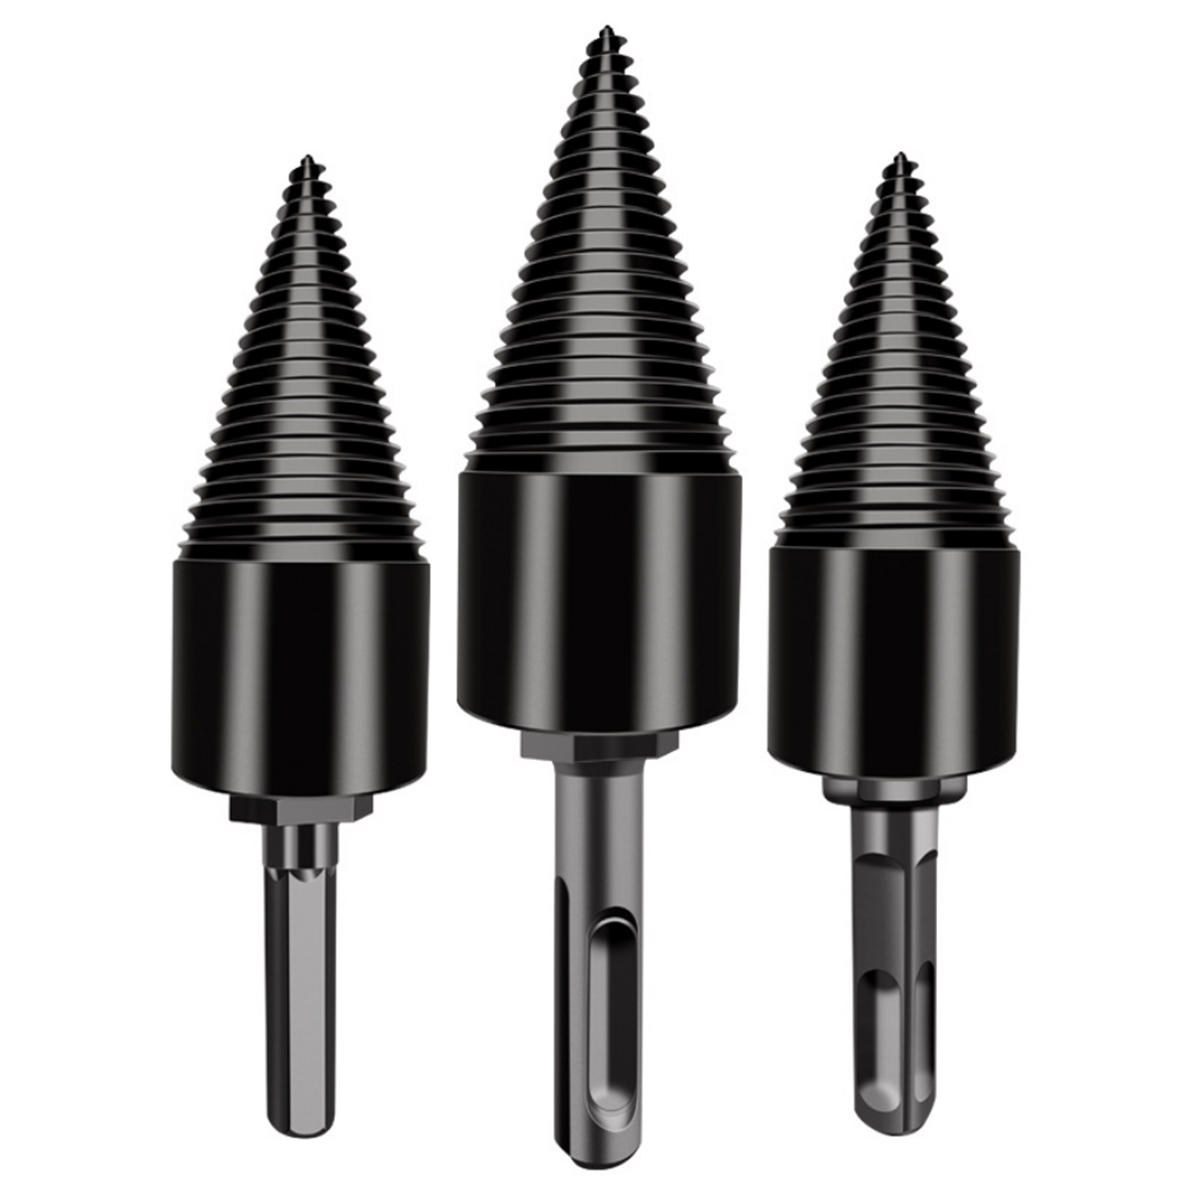 5-PCS-42mm32mm-Firewood-Splitter-Drill-RoundHexTriangleWrench-Shank-Wood-Cone-Reamer-Punch-Driver-St-1962068-9